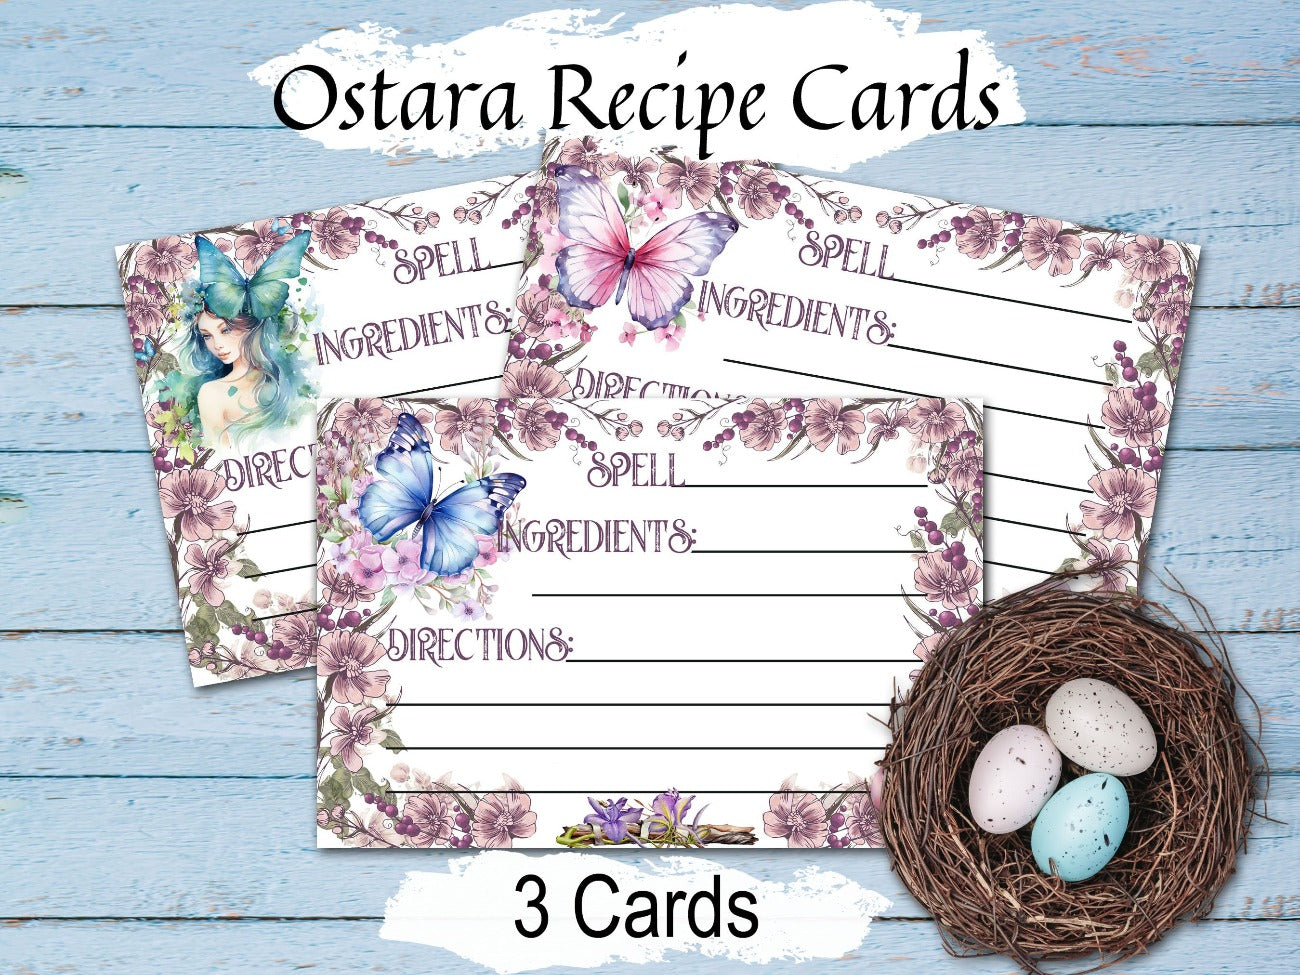 OSTARA SPELL CARDS, Record your herbal recipes, crafts, apothecary portions, & traditional magic spells for this Spring Equinox Wiccan Sabbat - Morgana Magick Spell